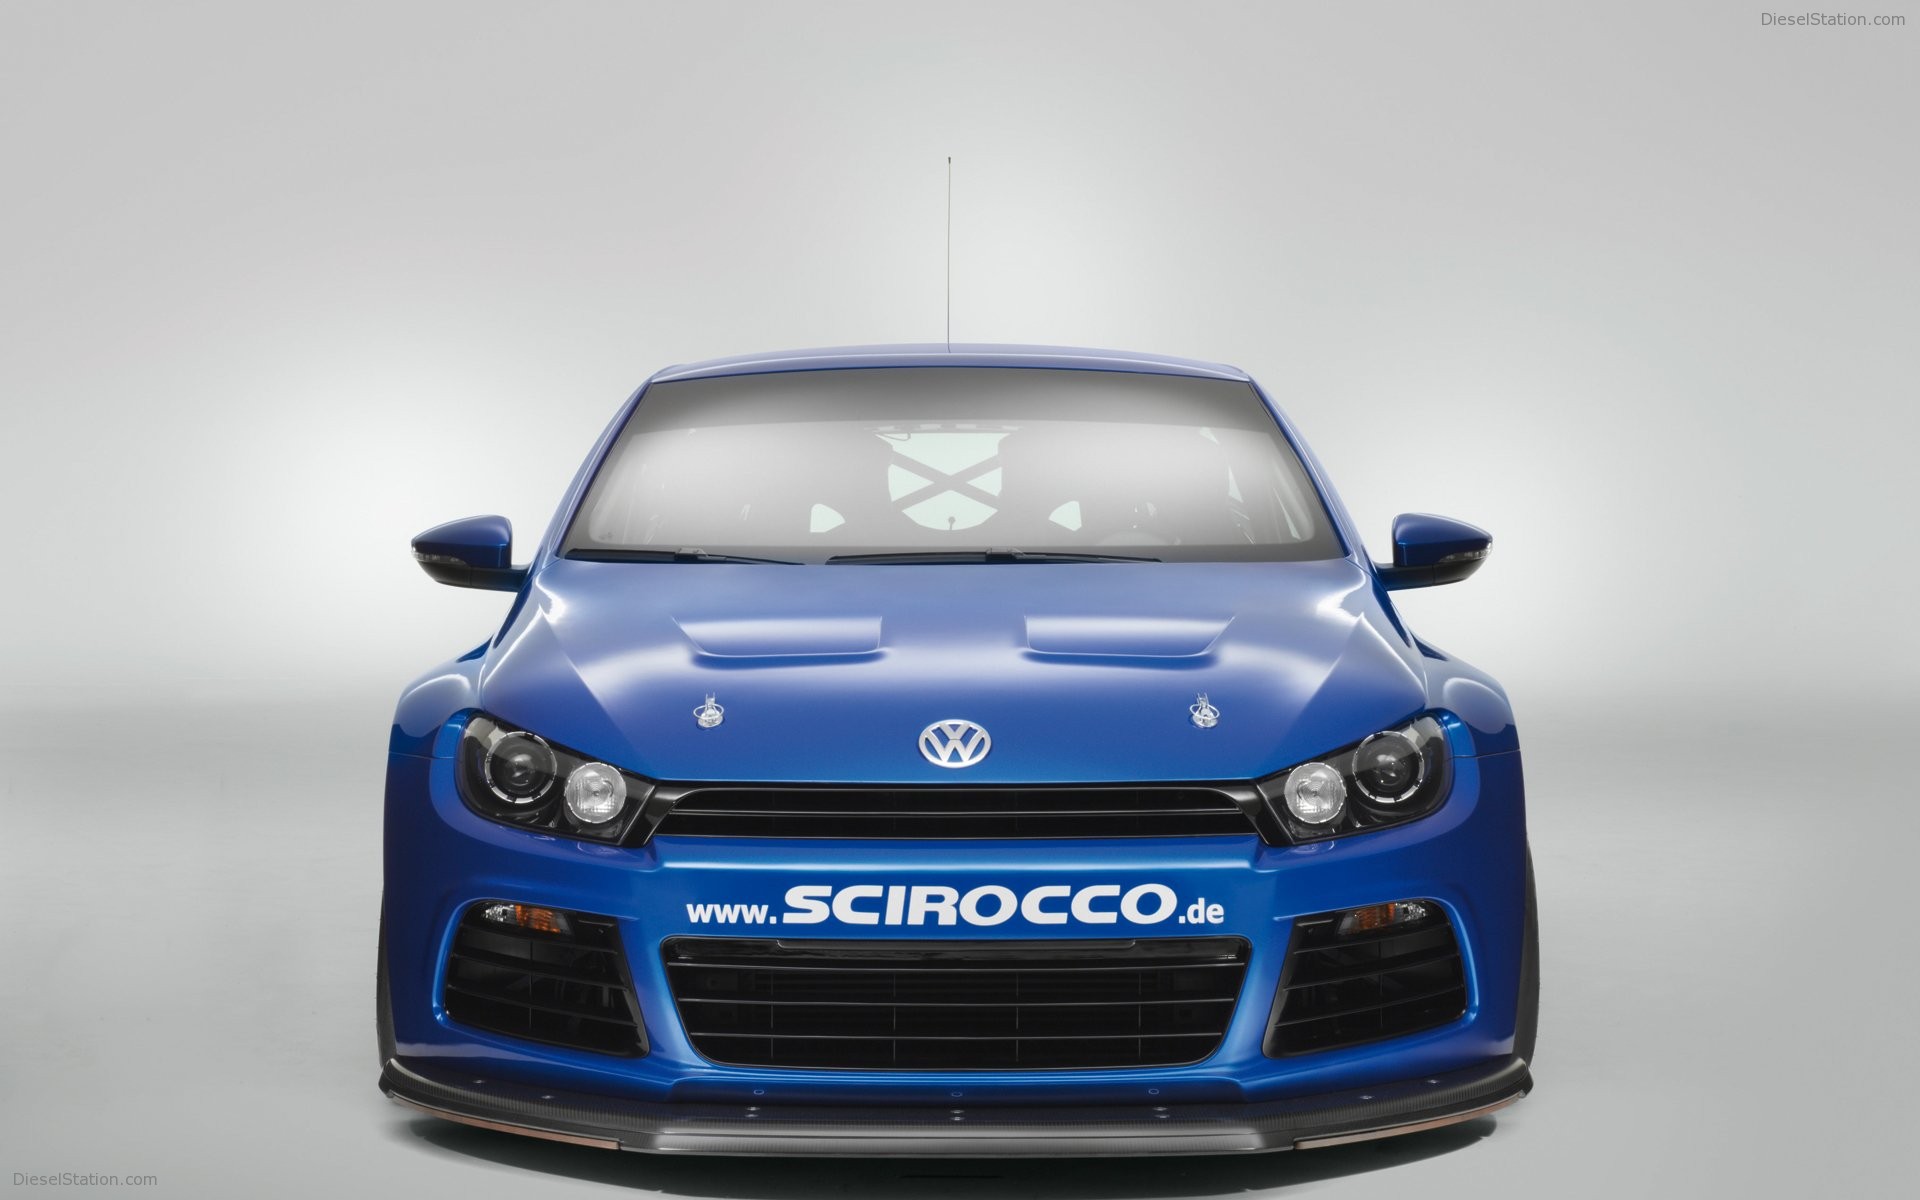 Volkswagen Scirocco GT24 Pictures. Published On : Sep 30, 2008